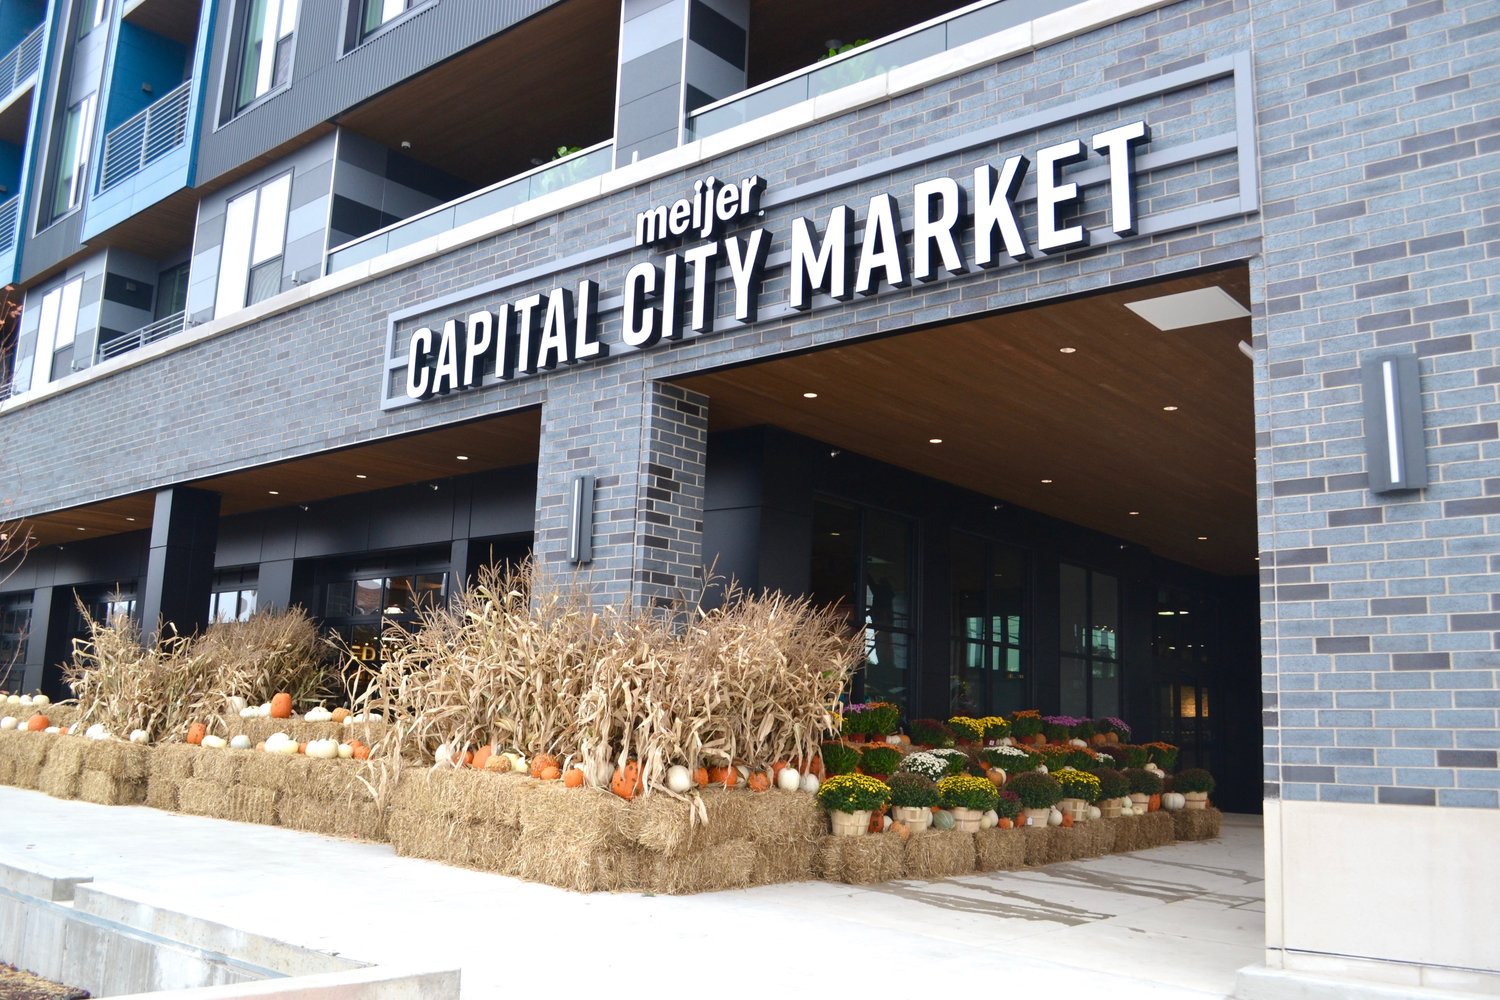 The front entrance to Meijer's Capital City Market.